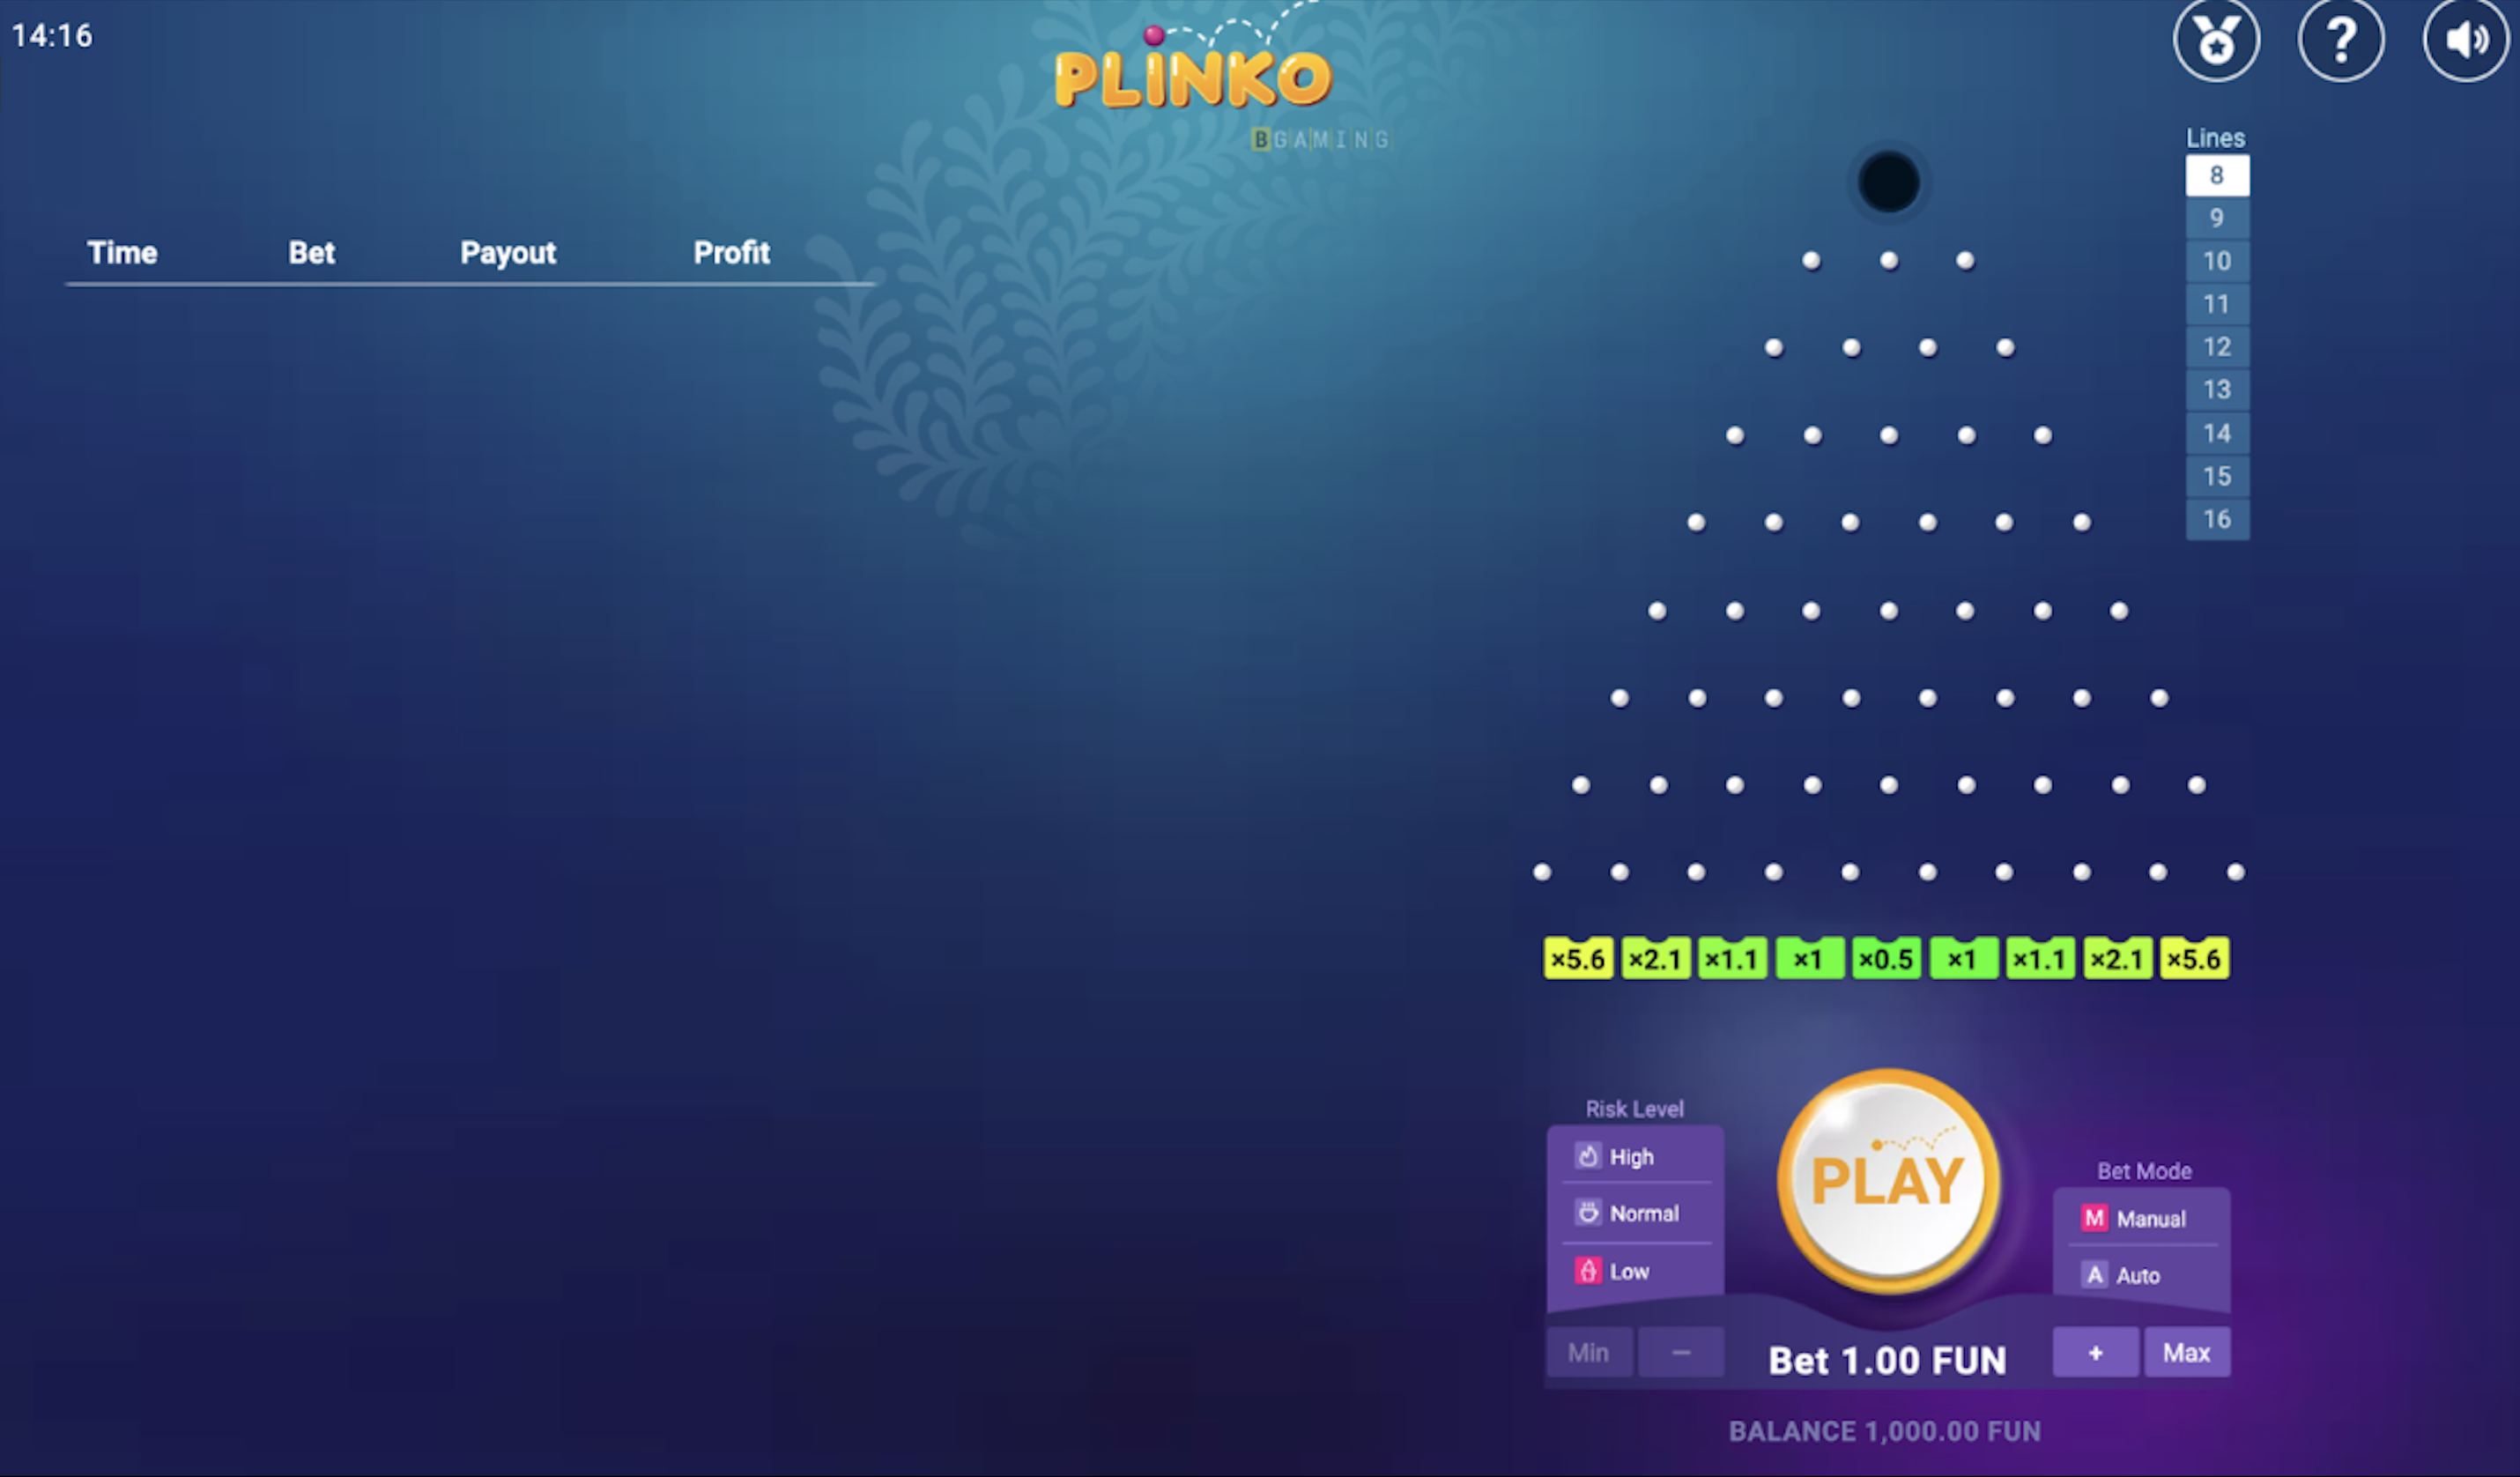 What is Plinko? | What is the Plinko game strategy?